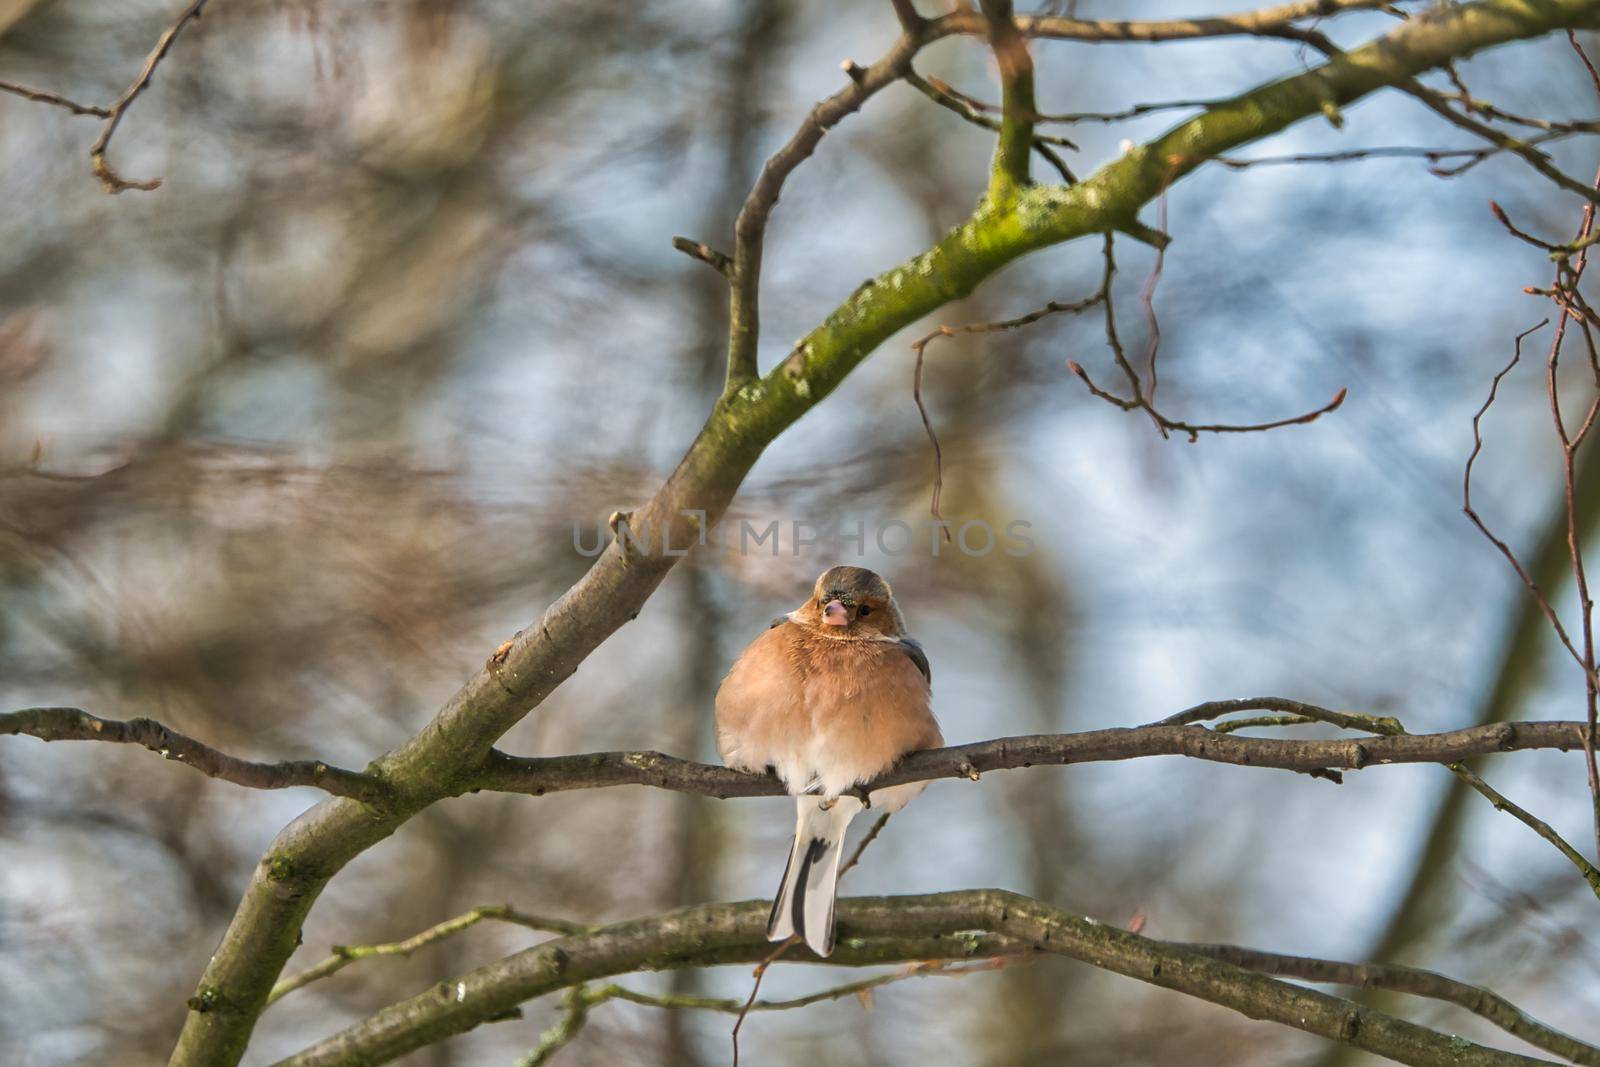 one cold chaffinch on a tree at a sunny and frosty winter day